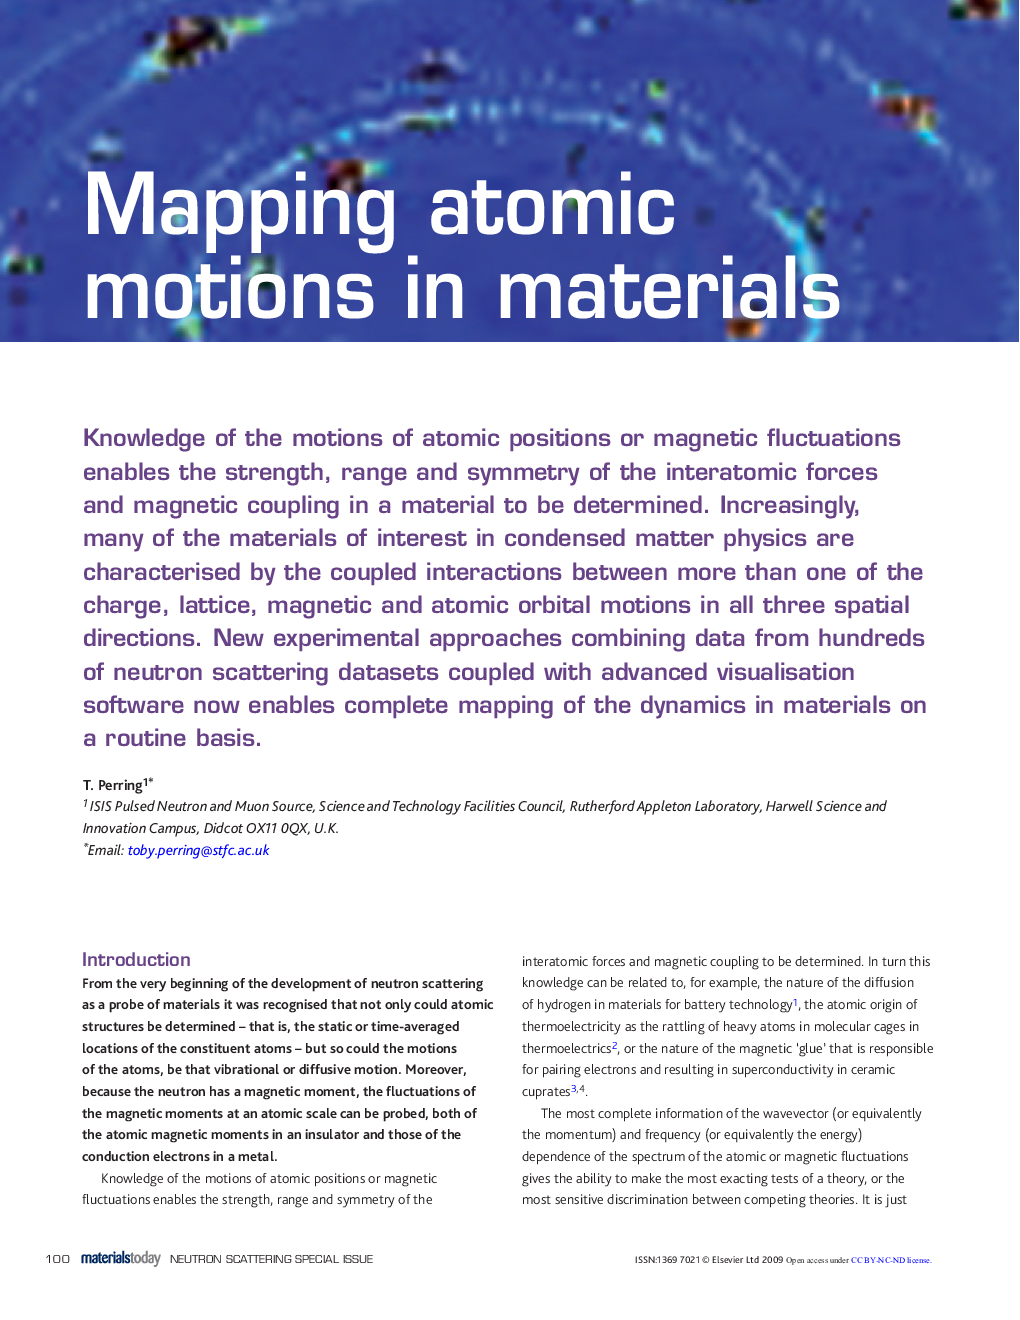 Mapping atomic motions in materials